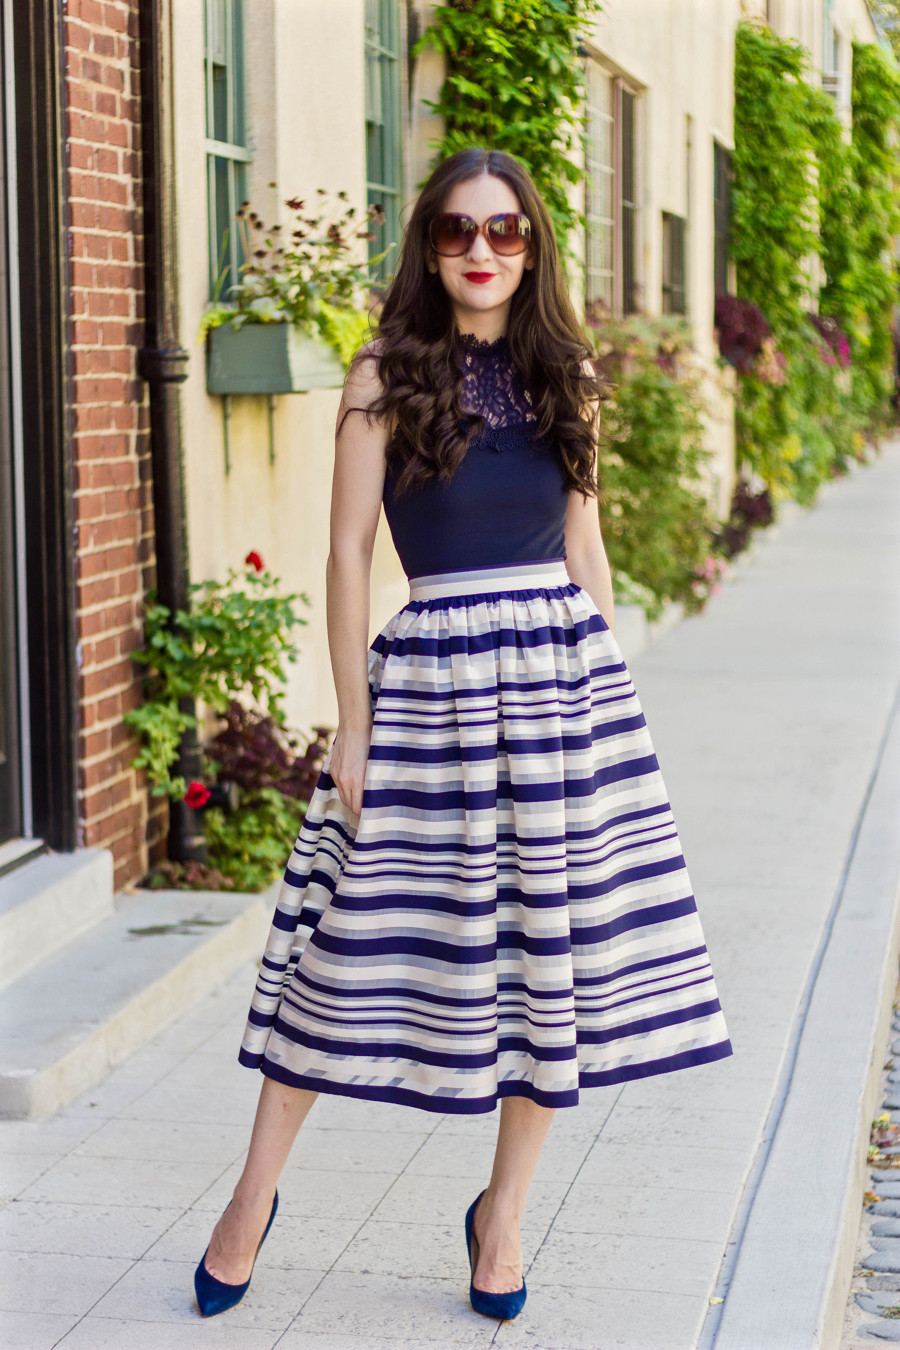 Erin Fetherston Quinnie Skirt, lace top, navy lace top, anthropologie menton midi skirt, navy beige striped skirt, striped skirt